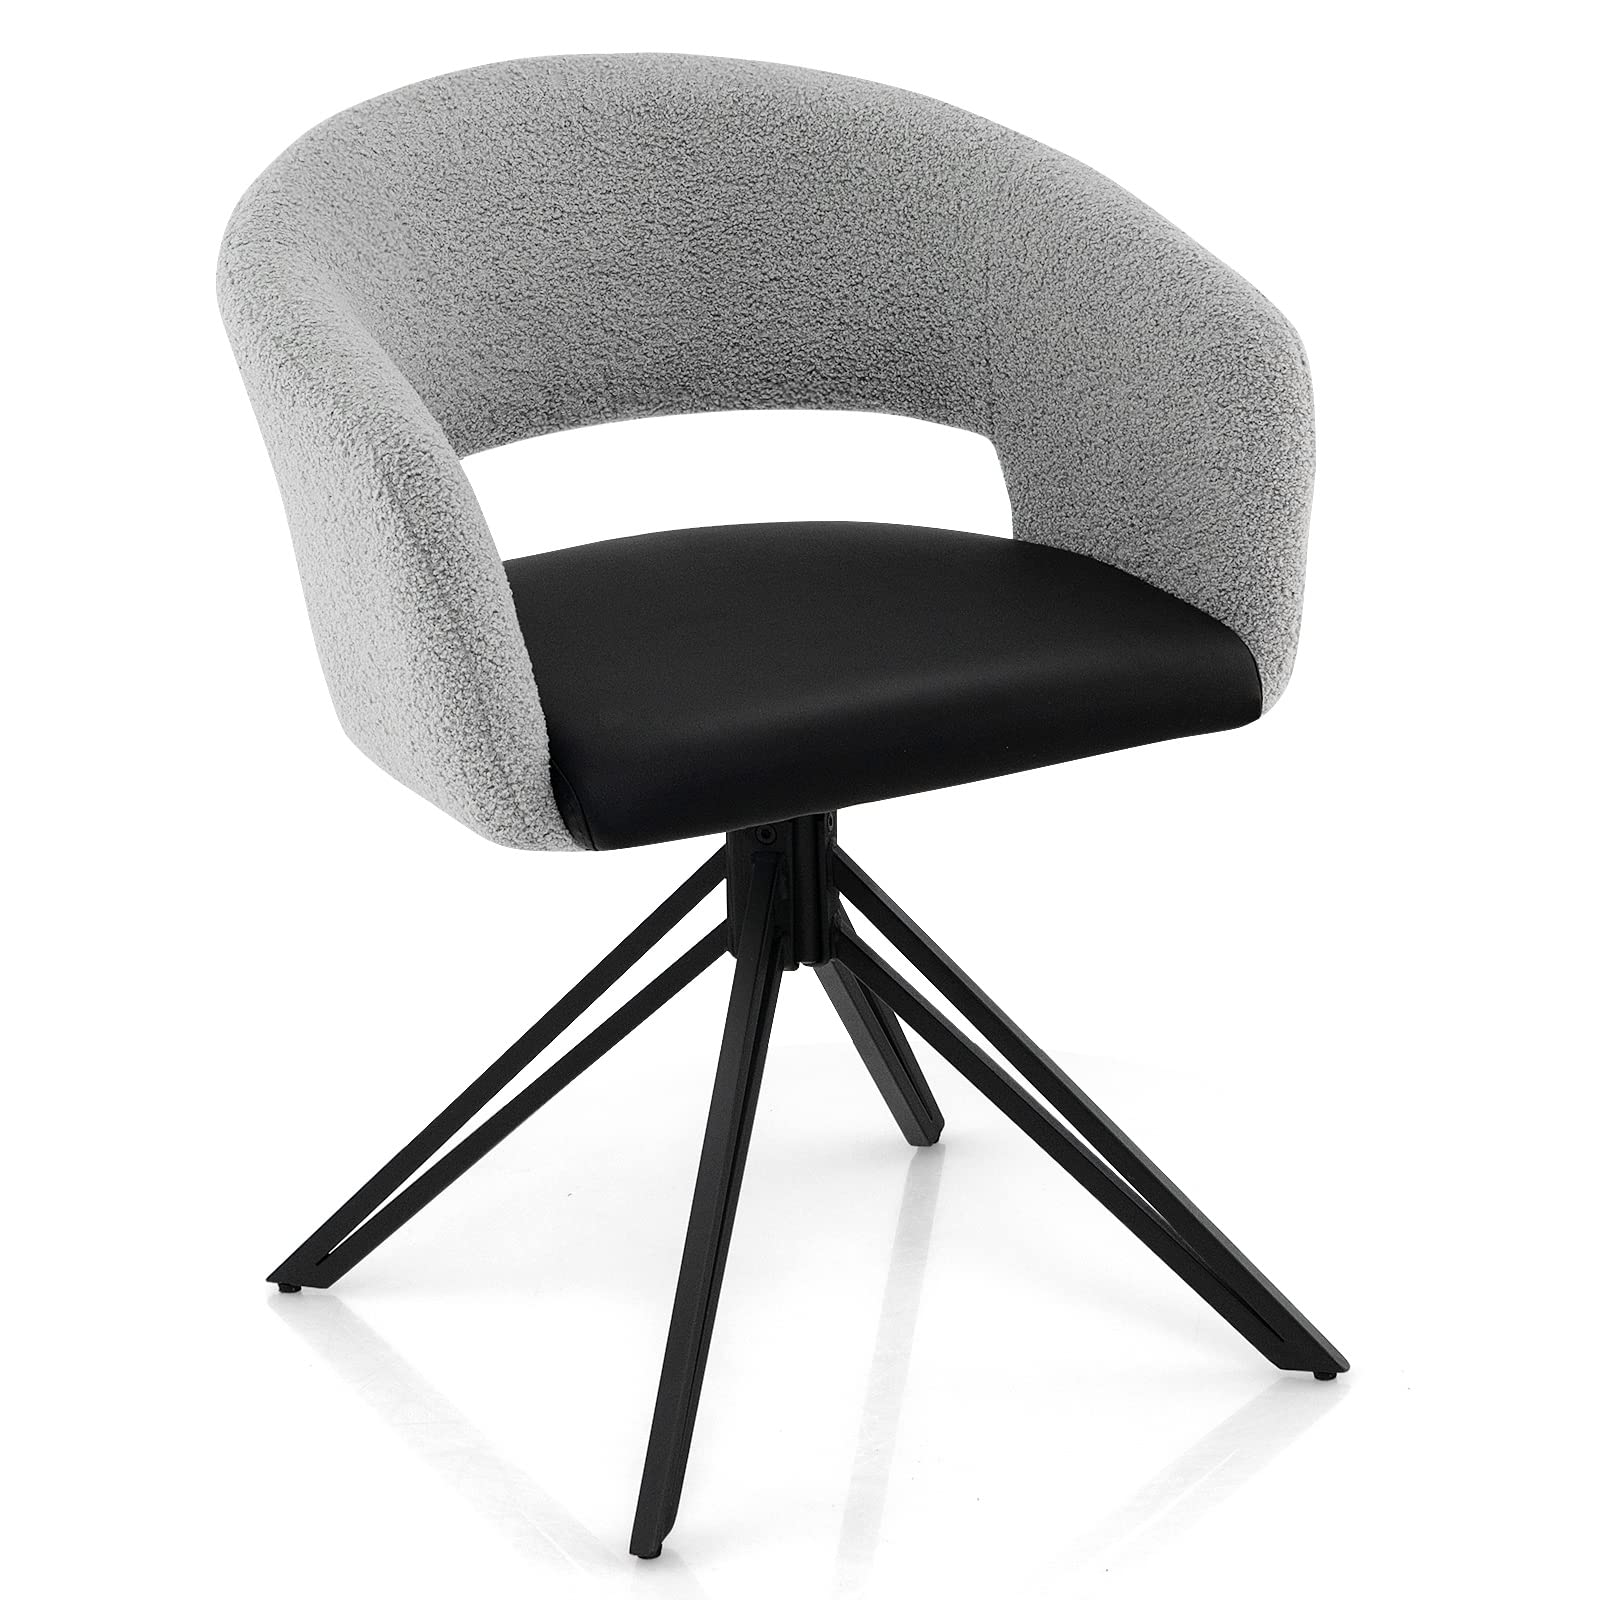 Giantex Modern Swivel Accent Chair, Sherpa Covered Desk Chair No Wheels with Solid Steel Legs